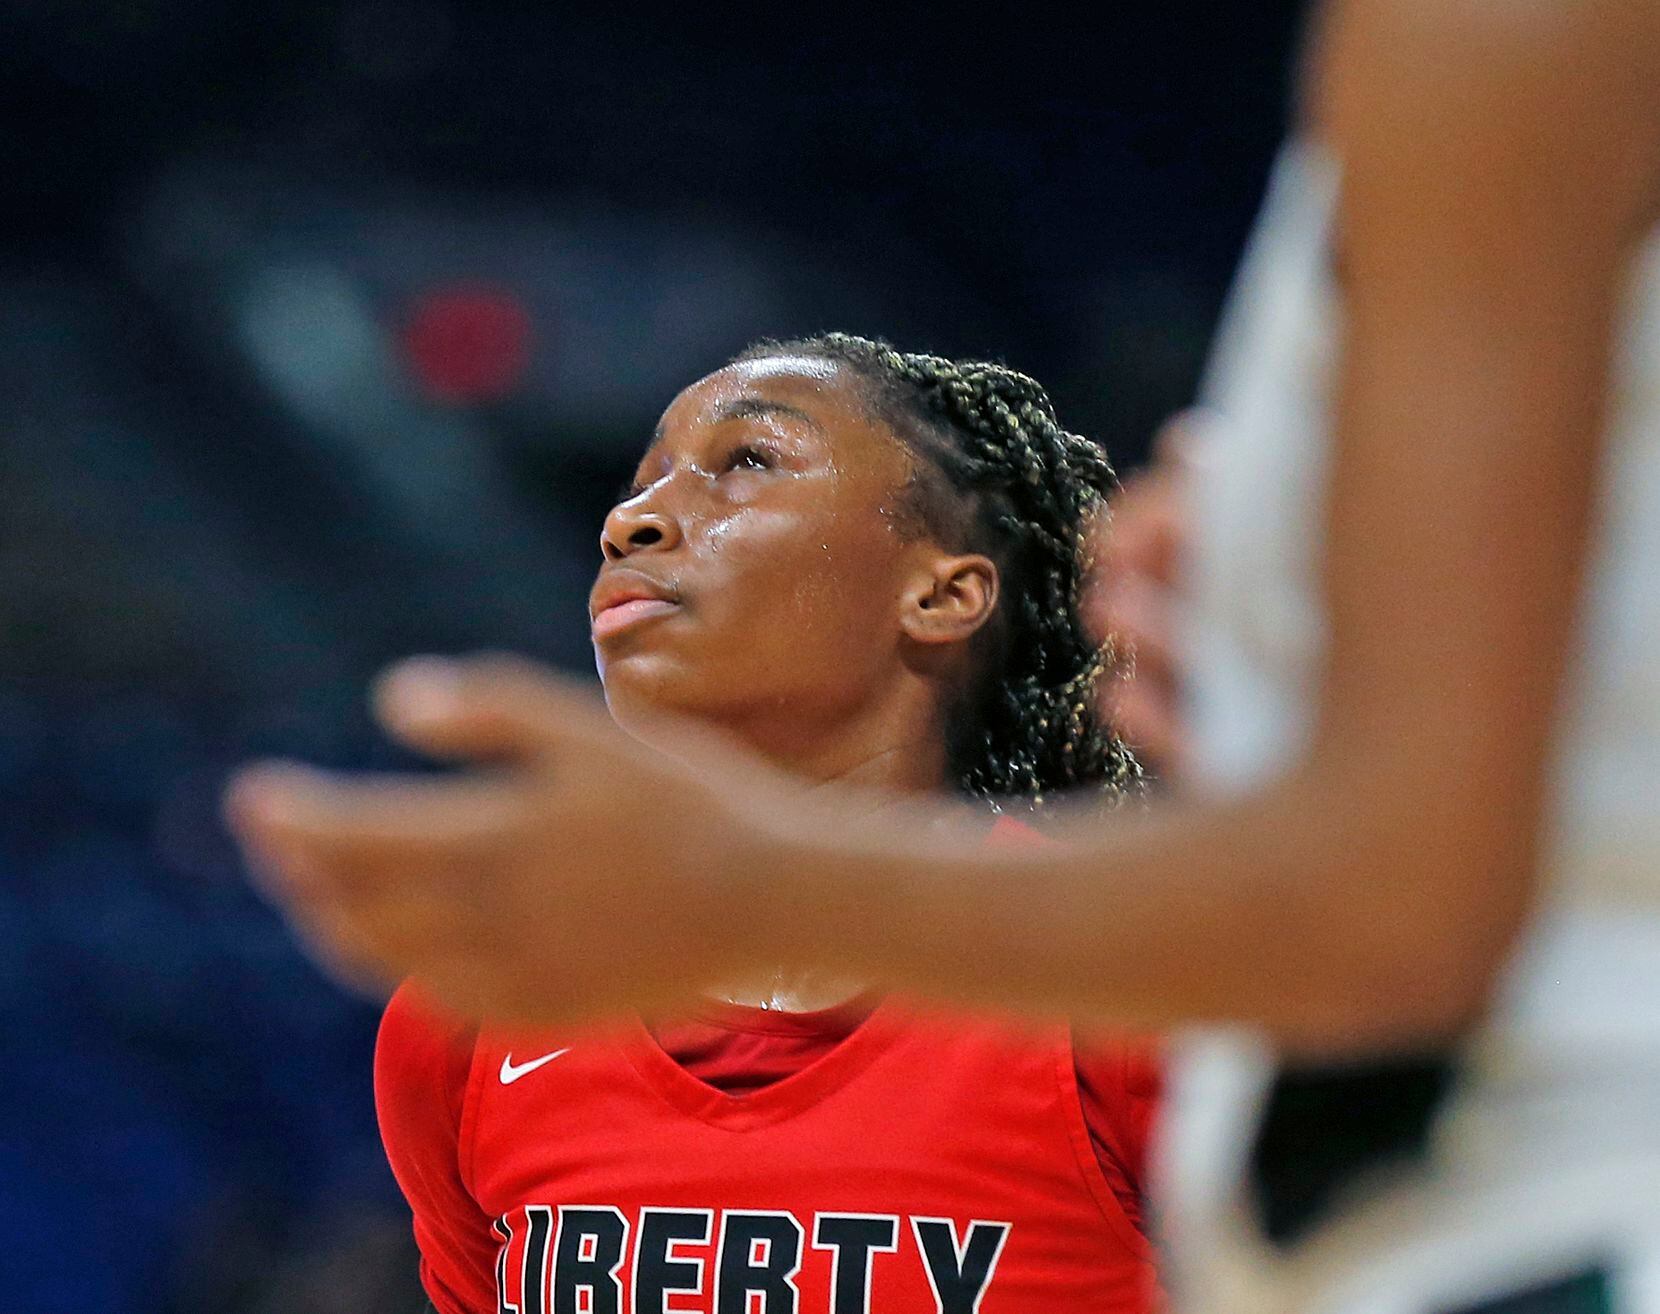 Frisco Liberty Jazzy Owens-Barnett #30 reacts after missing a free throw late in fourth...